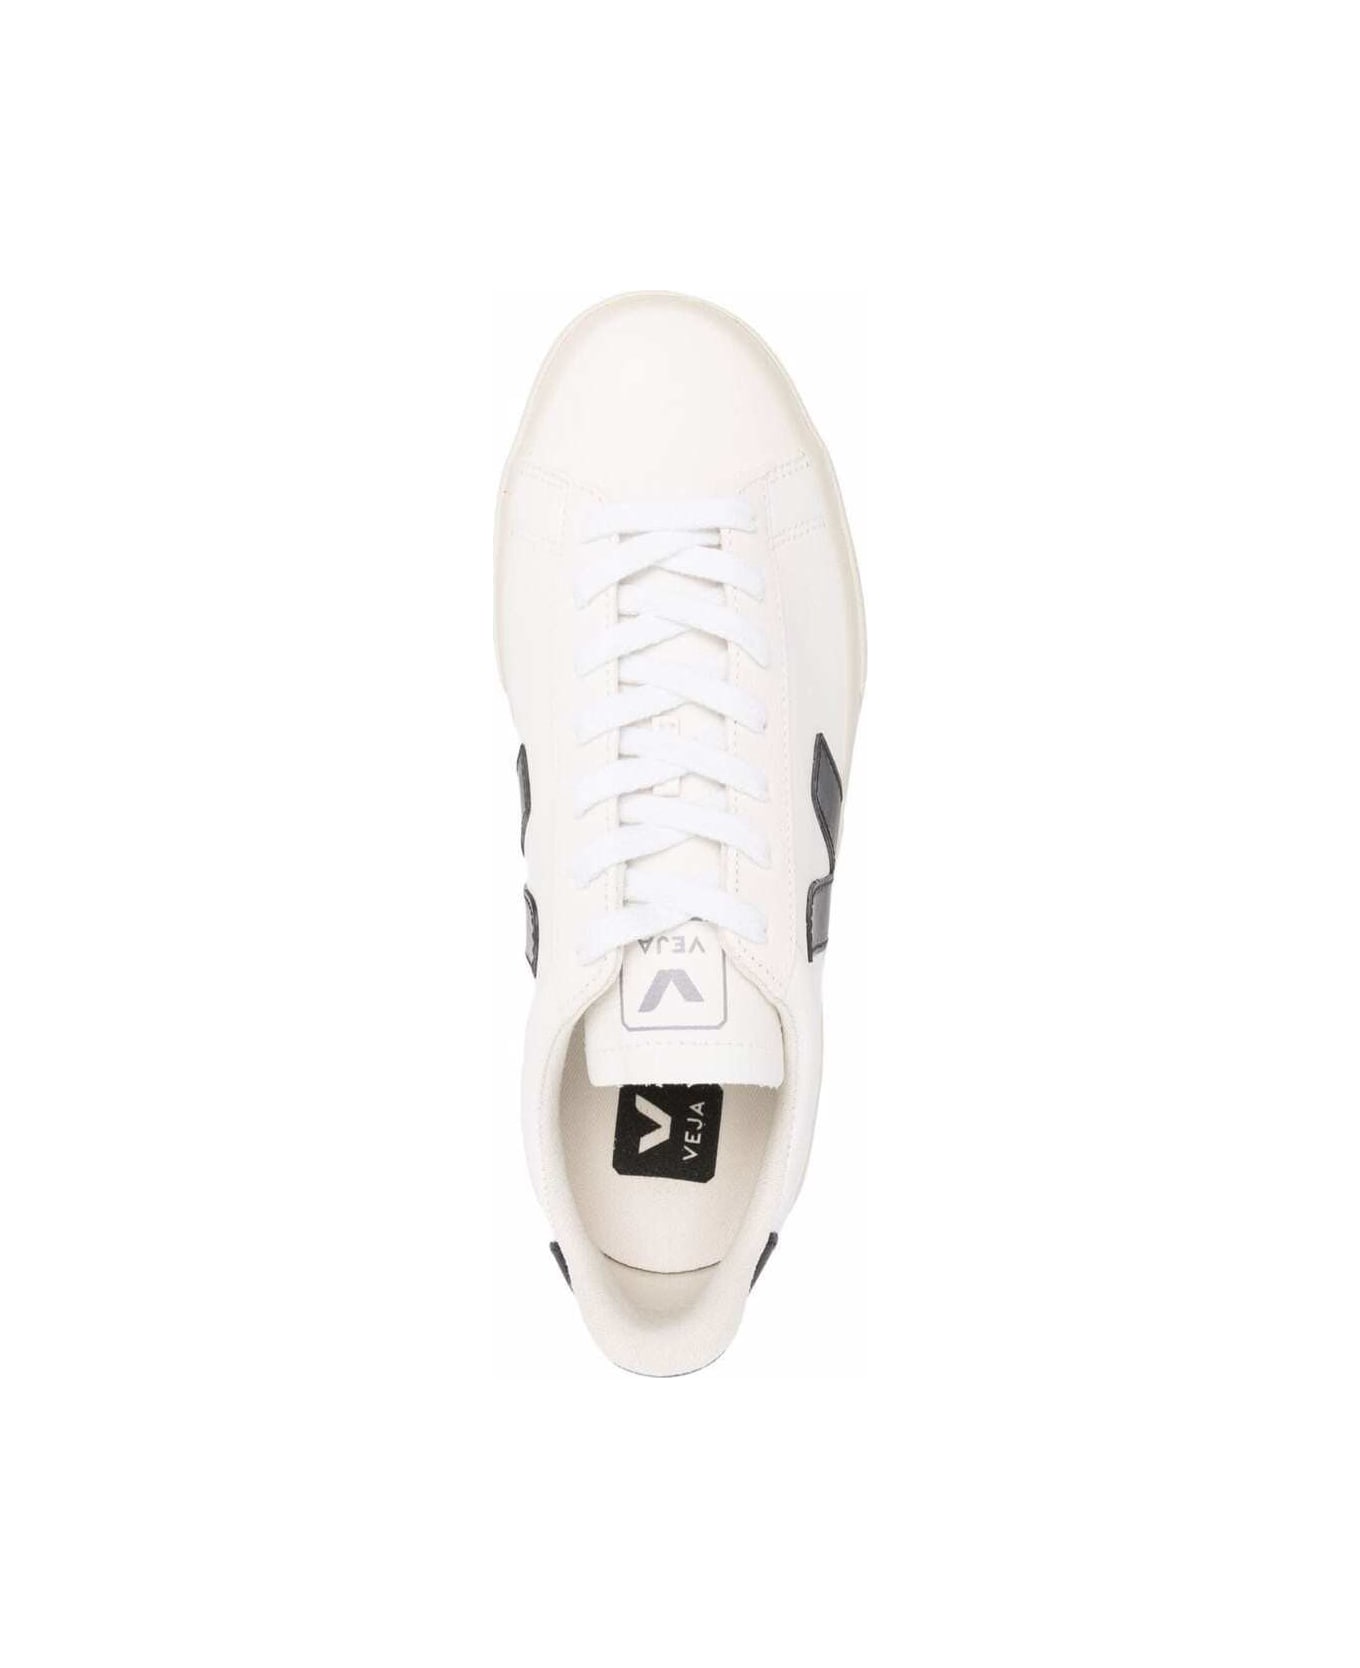 Veja Woman's Campo White And Black Vegan Leather Sneakers - Extra White/ Black